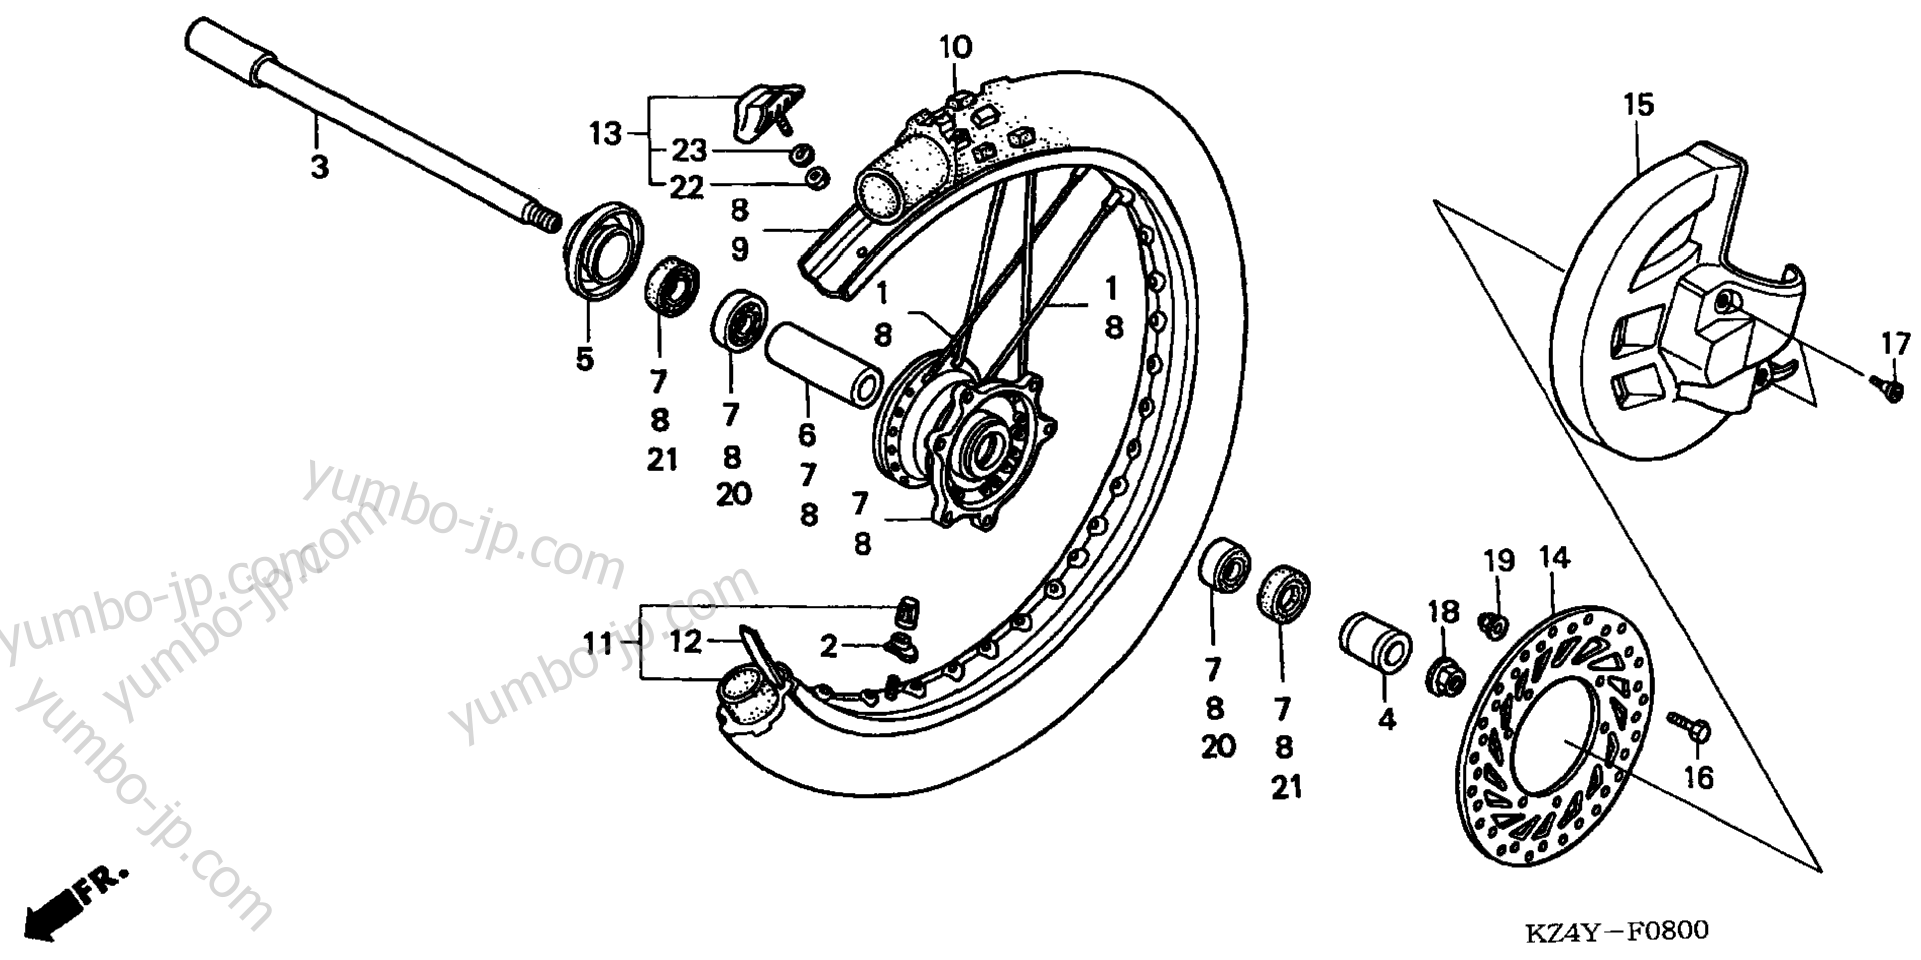 FRONT WHEEL for motorcycles HONDA CR125R A 2001 year